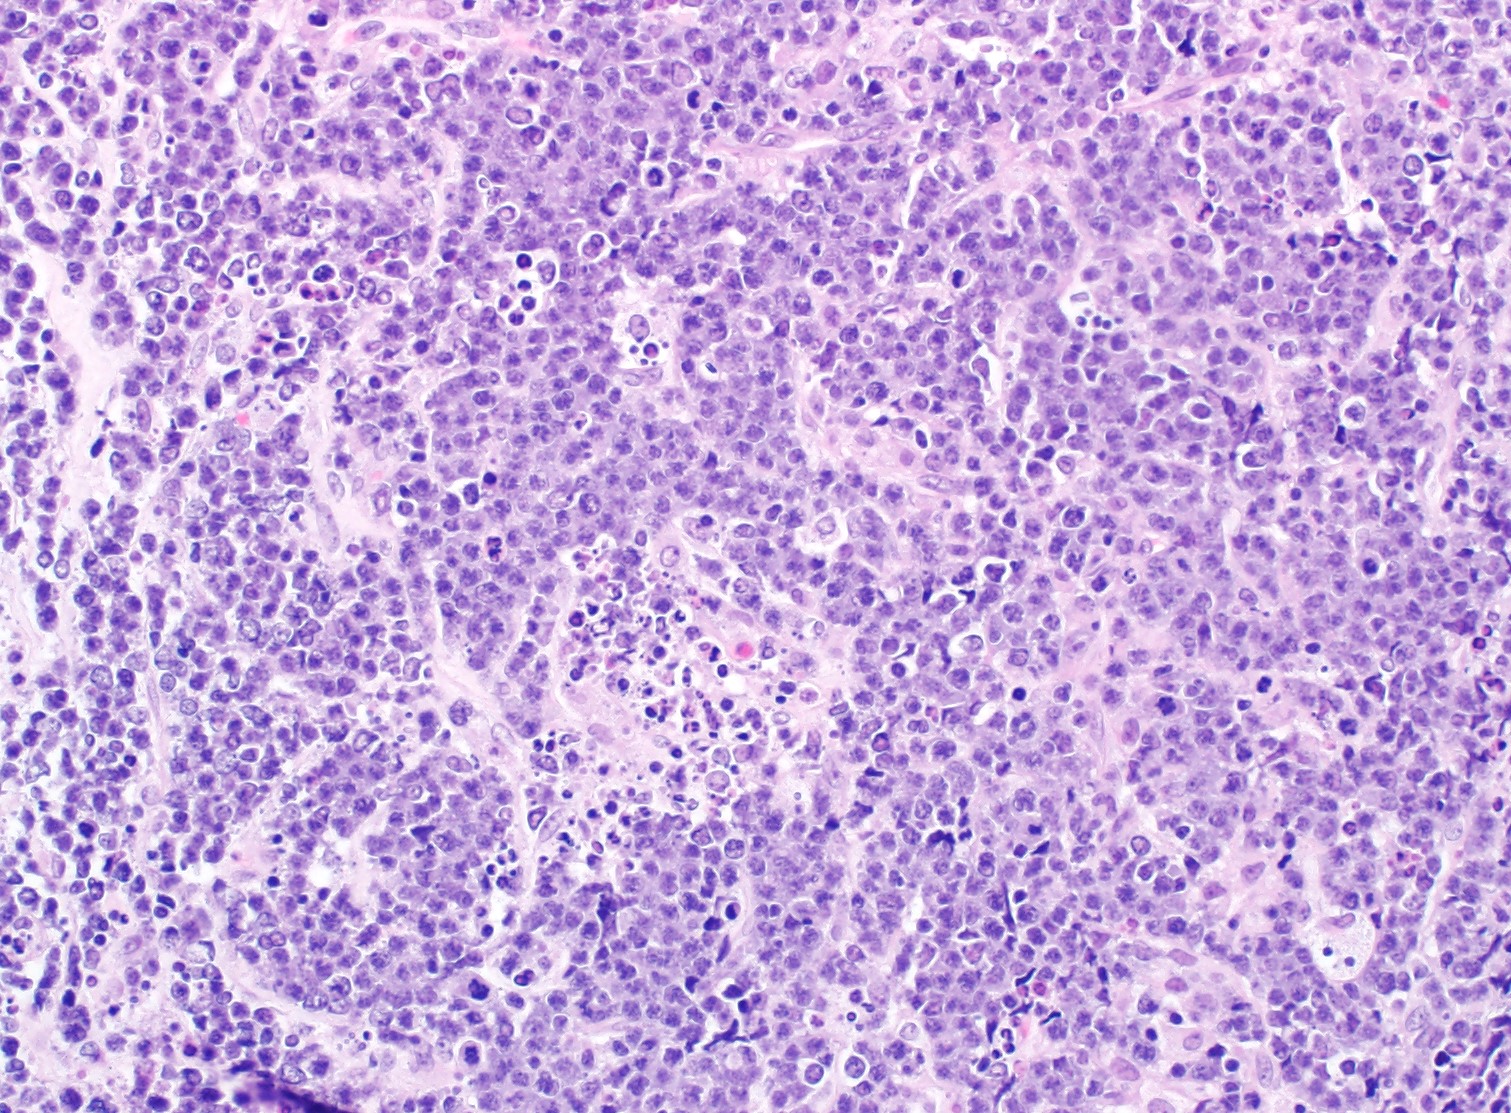 Lymphoma cells with interspersed tingible body macrophages